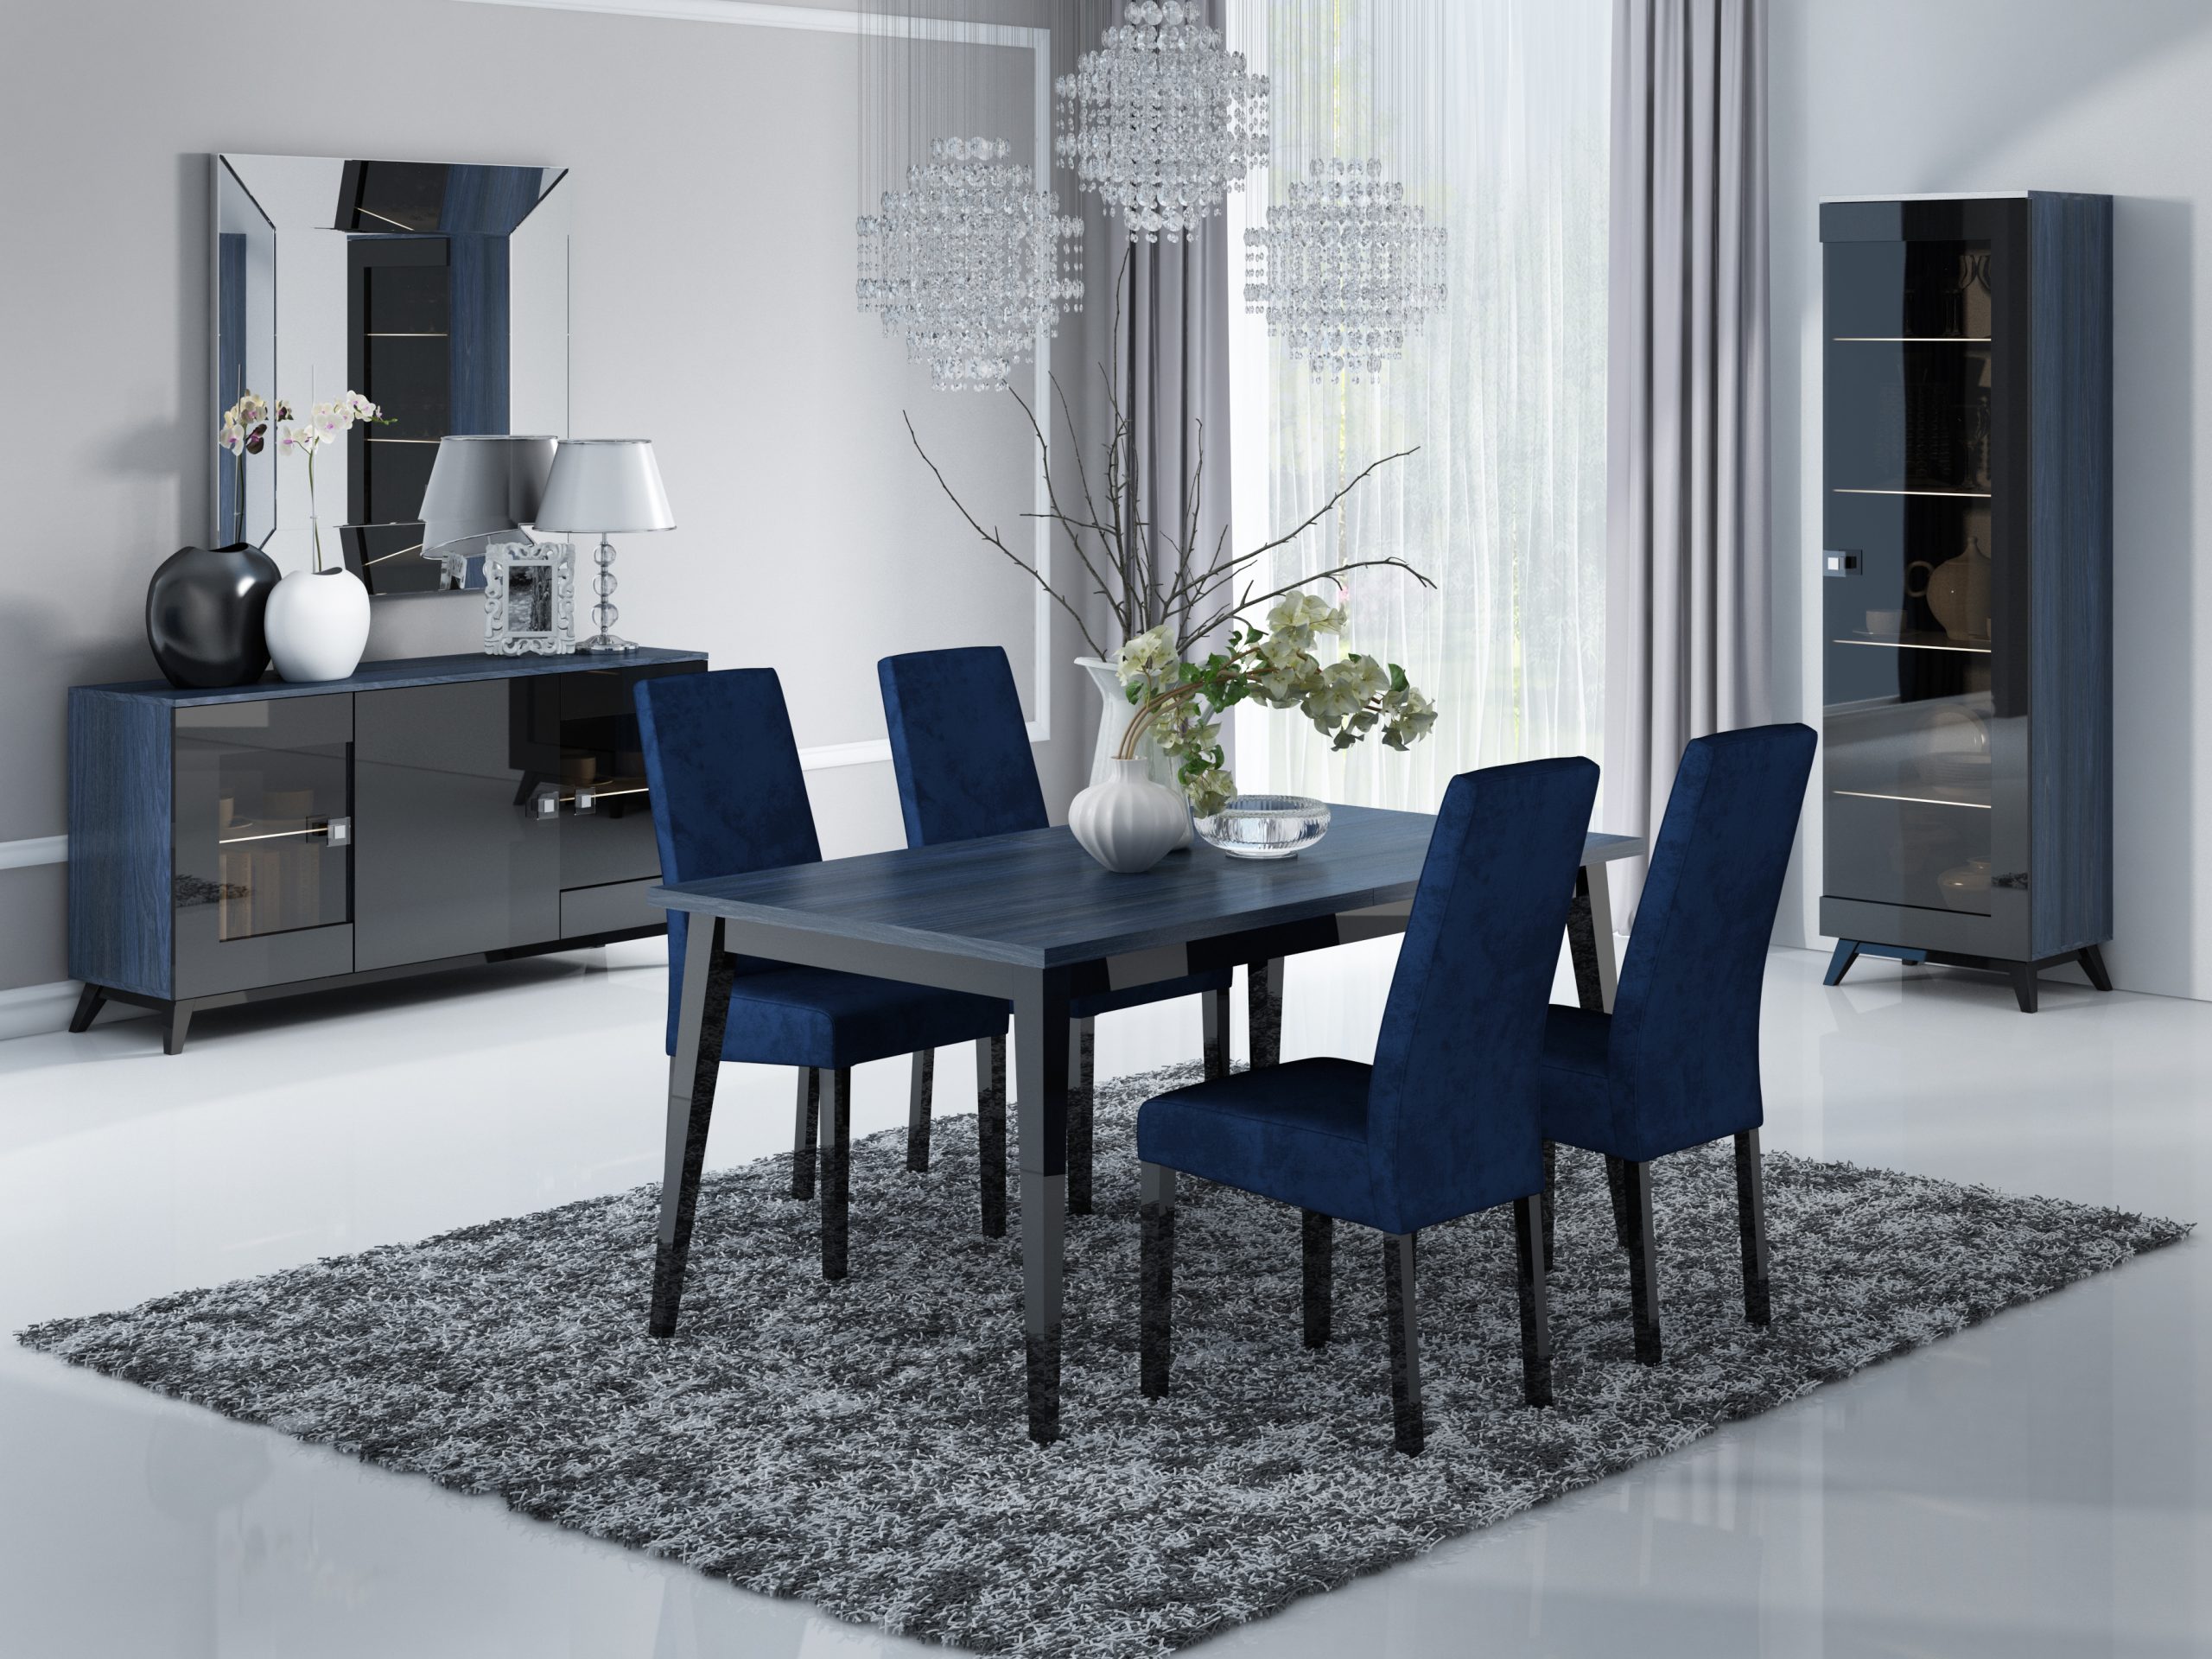 The visualisation shows a modern living room, modern furniture in blue colouring with black legs, a chest of drawers and a showcase enriched with black glass.